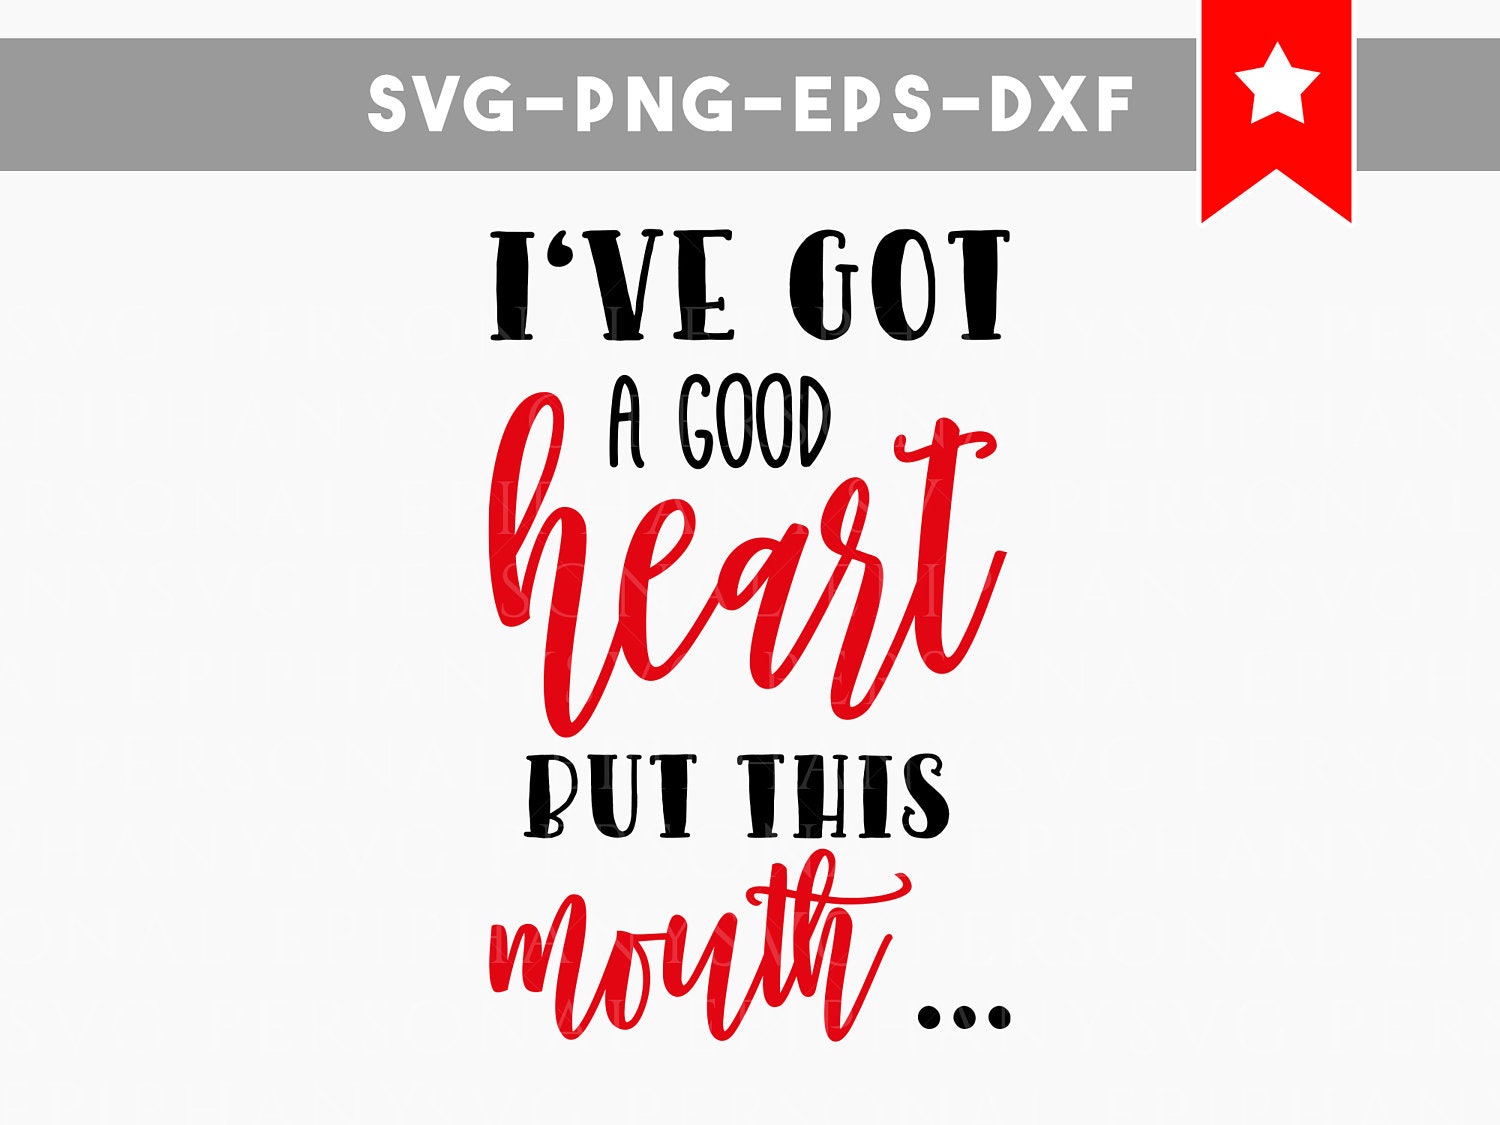 Download ive got a good heart svg but this mouth svg funny quotes